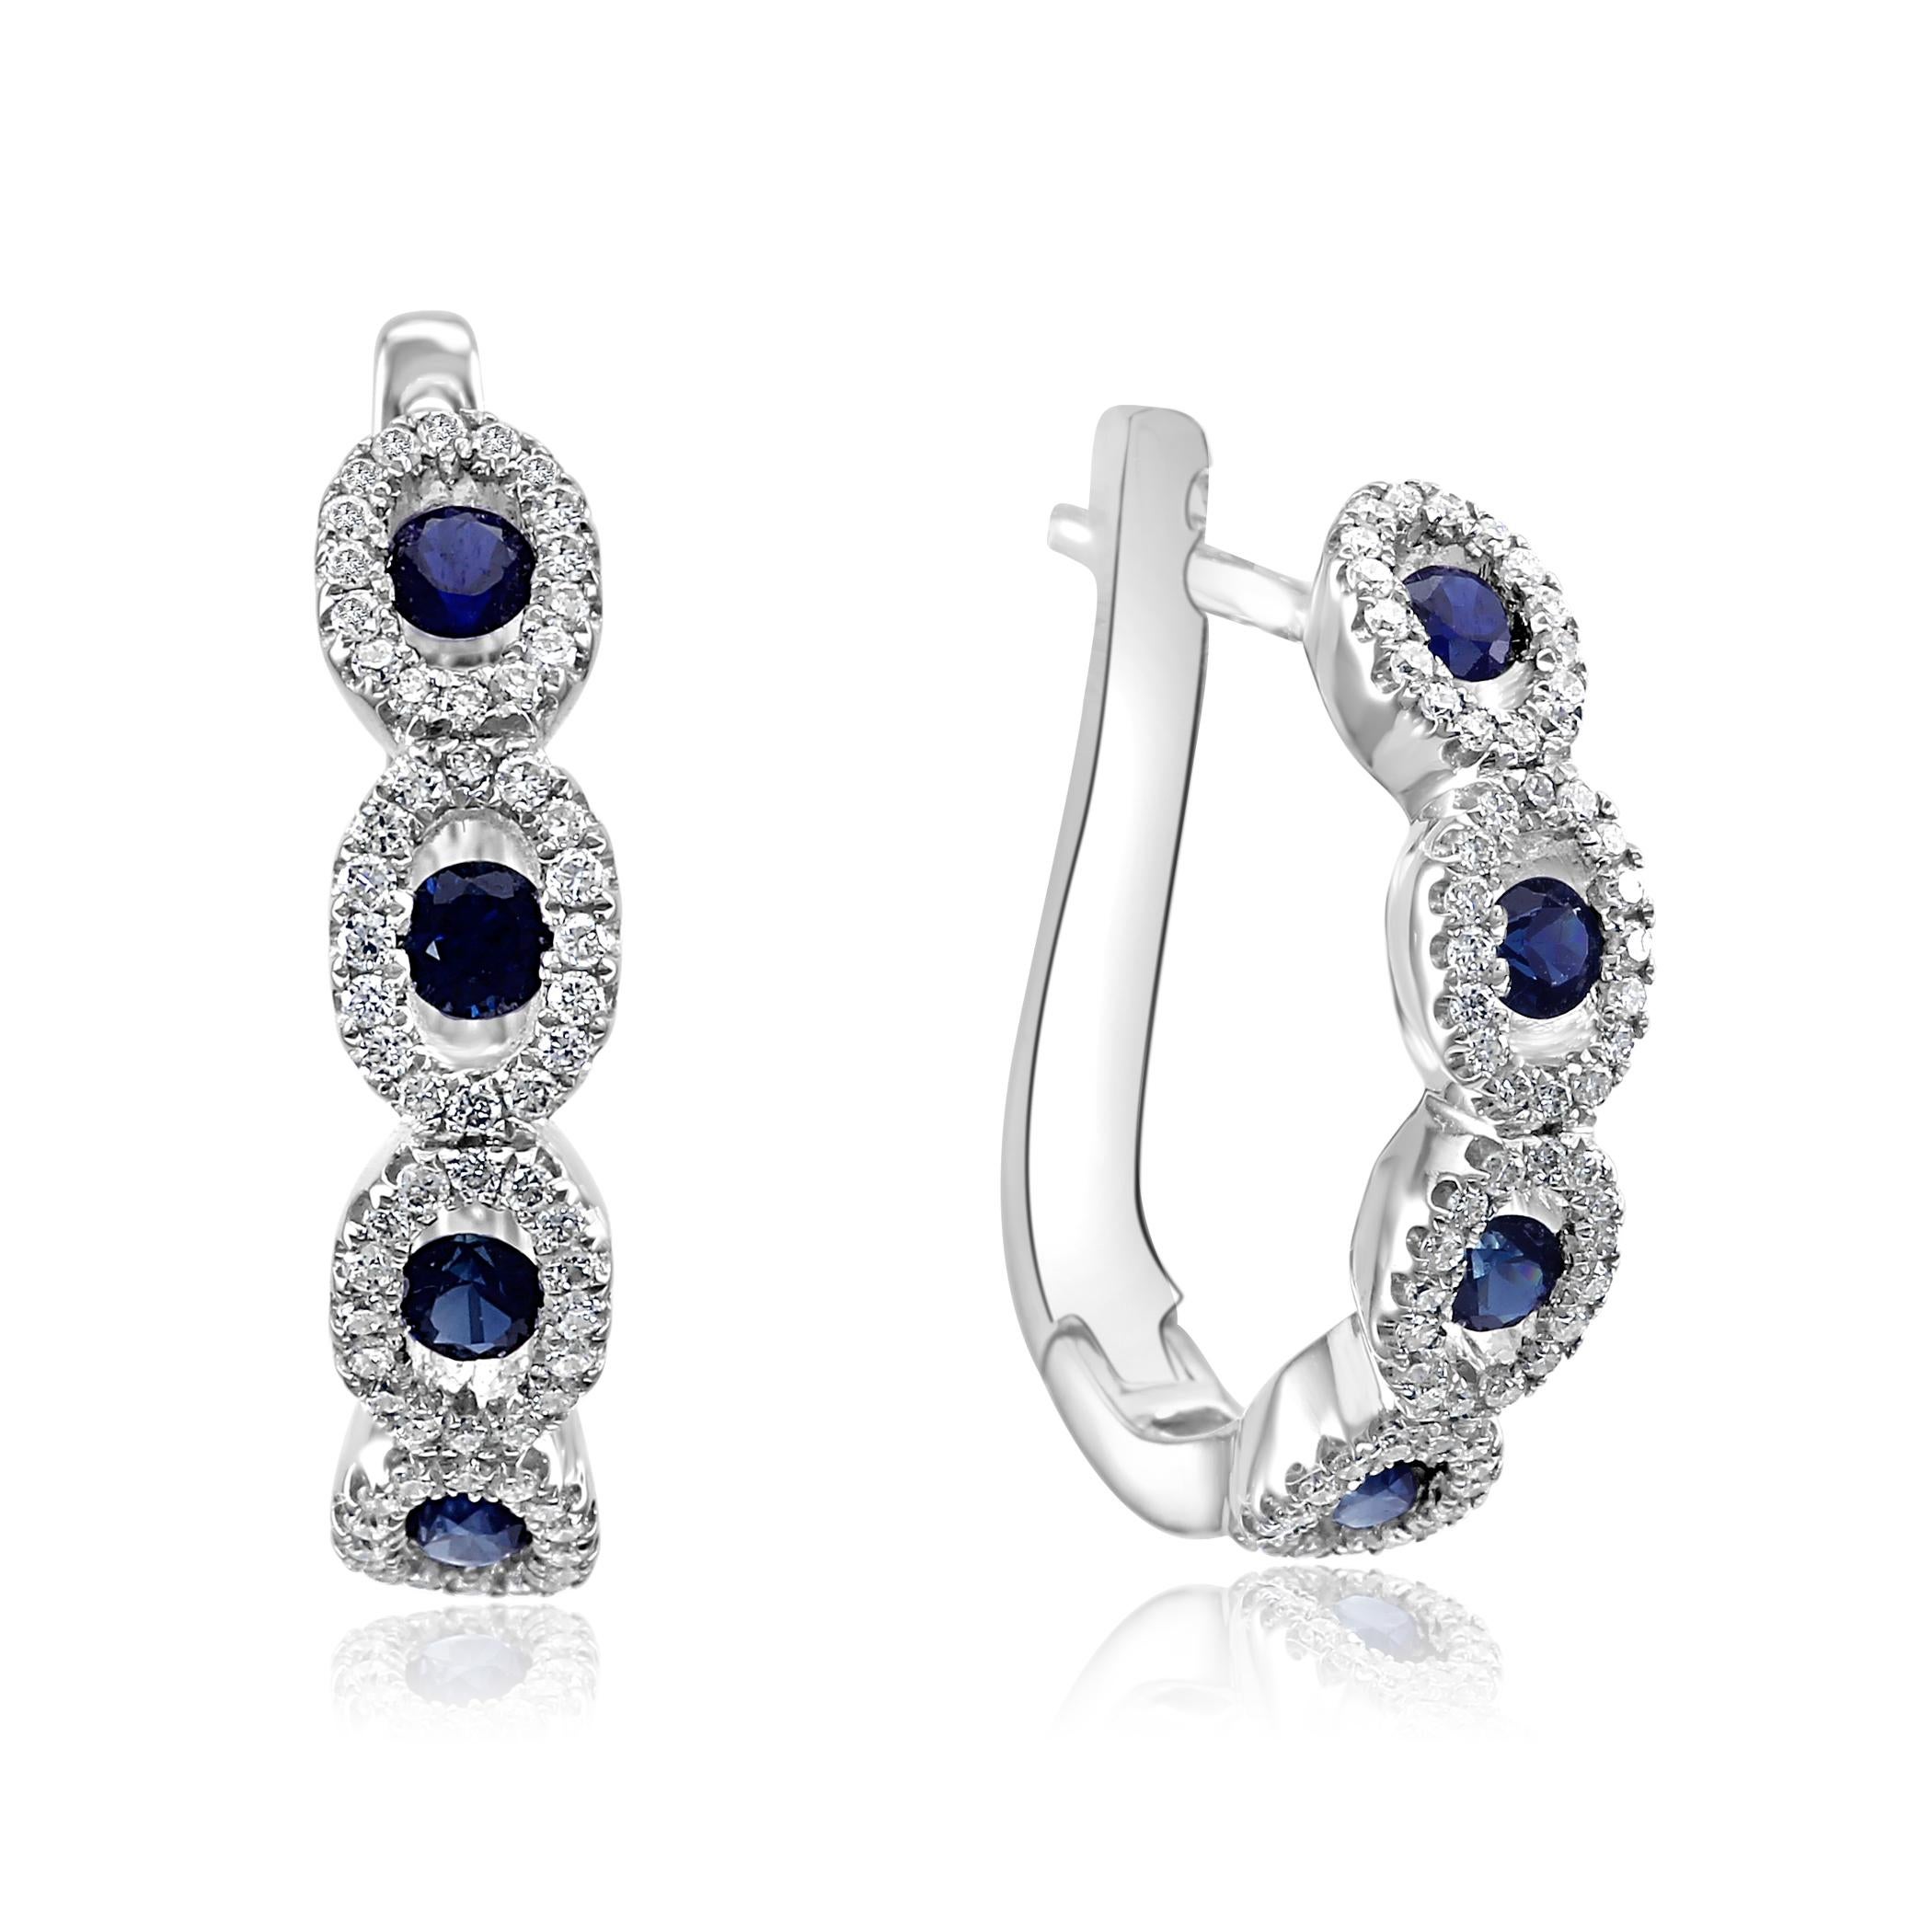 8 Blue Sapphire Round 0.55 Carat encircled in Halo of 128 White G-H Color SI clarity Diamond Round 0.40 Carat set in 14K White Gold Dangle Drop Fashion Lever back Earrings.

Total Stone Weight 0.95 Carat

 Style available in different price ranges